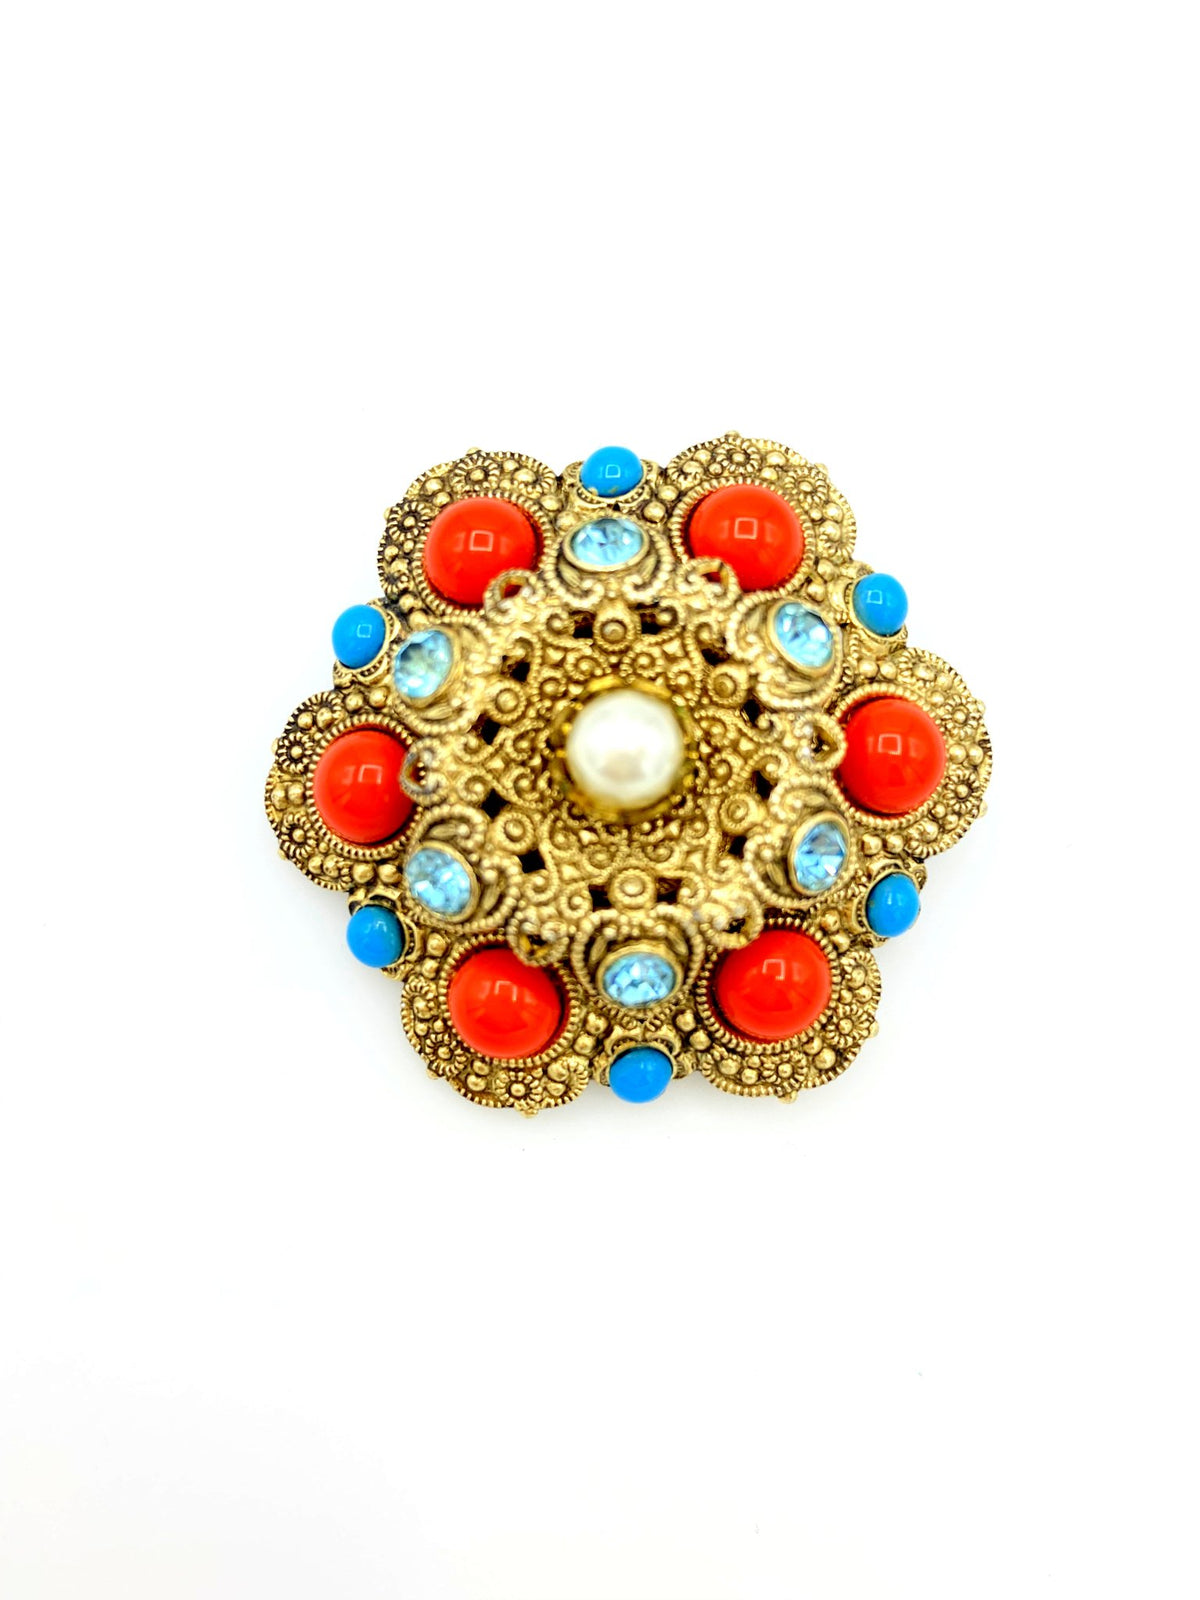 Coral & Turquoise Victorian Rival Brooch - 24 Wishes Vintage Jewelry